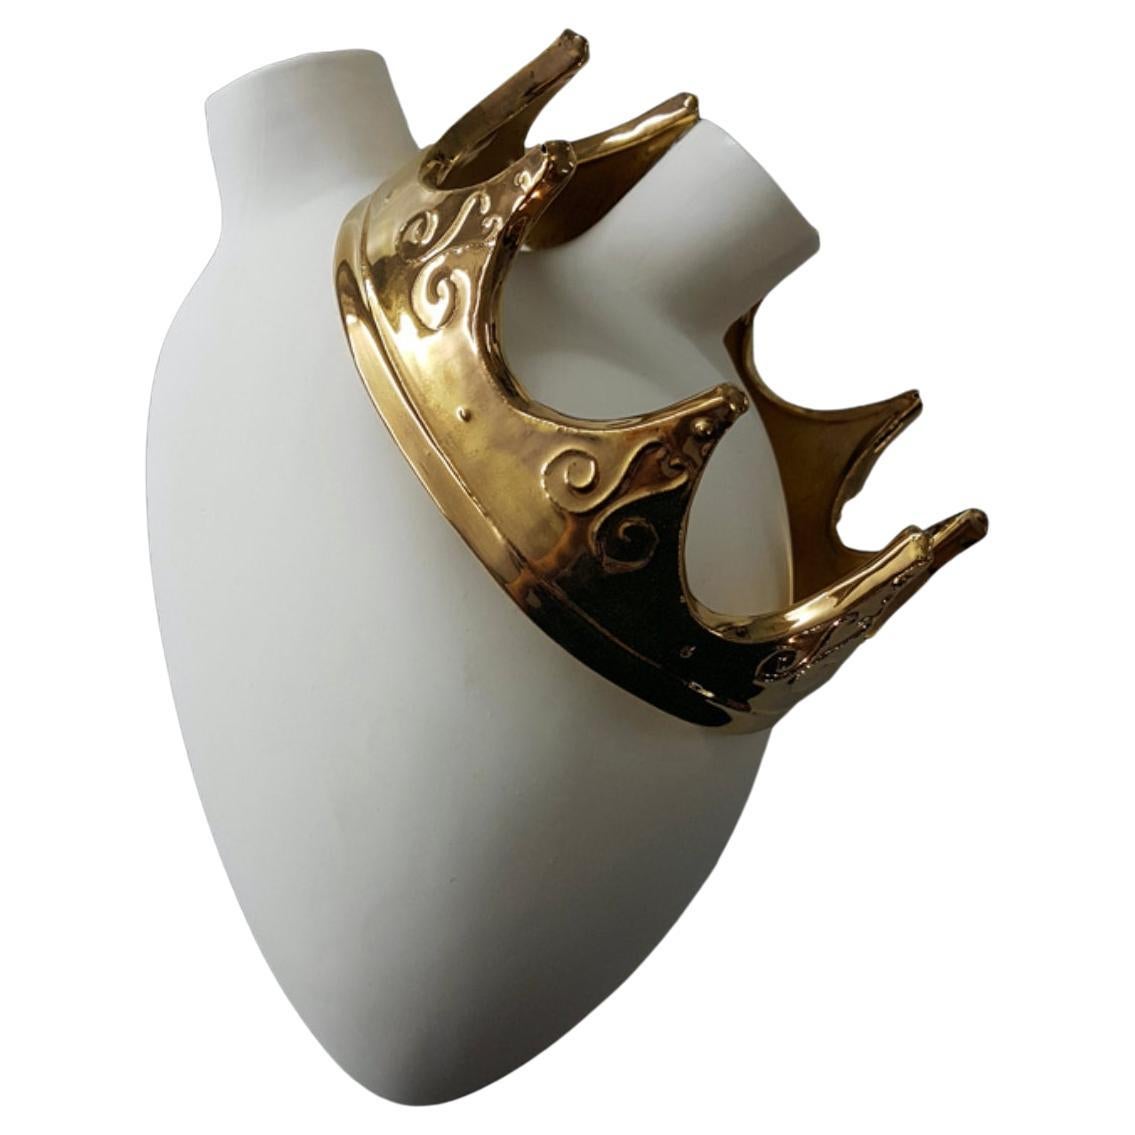 "Gold" Hearts Design Vases Set of 3 Pieces, Made in Italy, 2019, Wall Decor For Sale